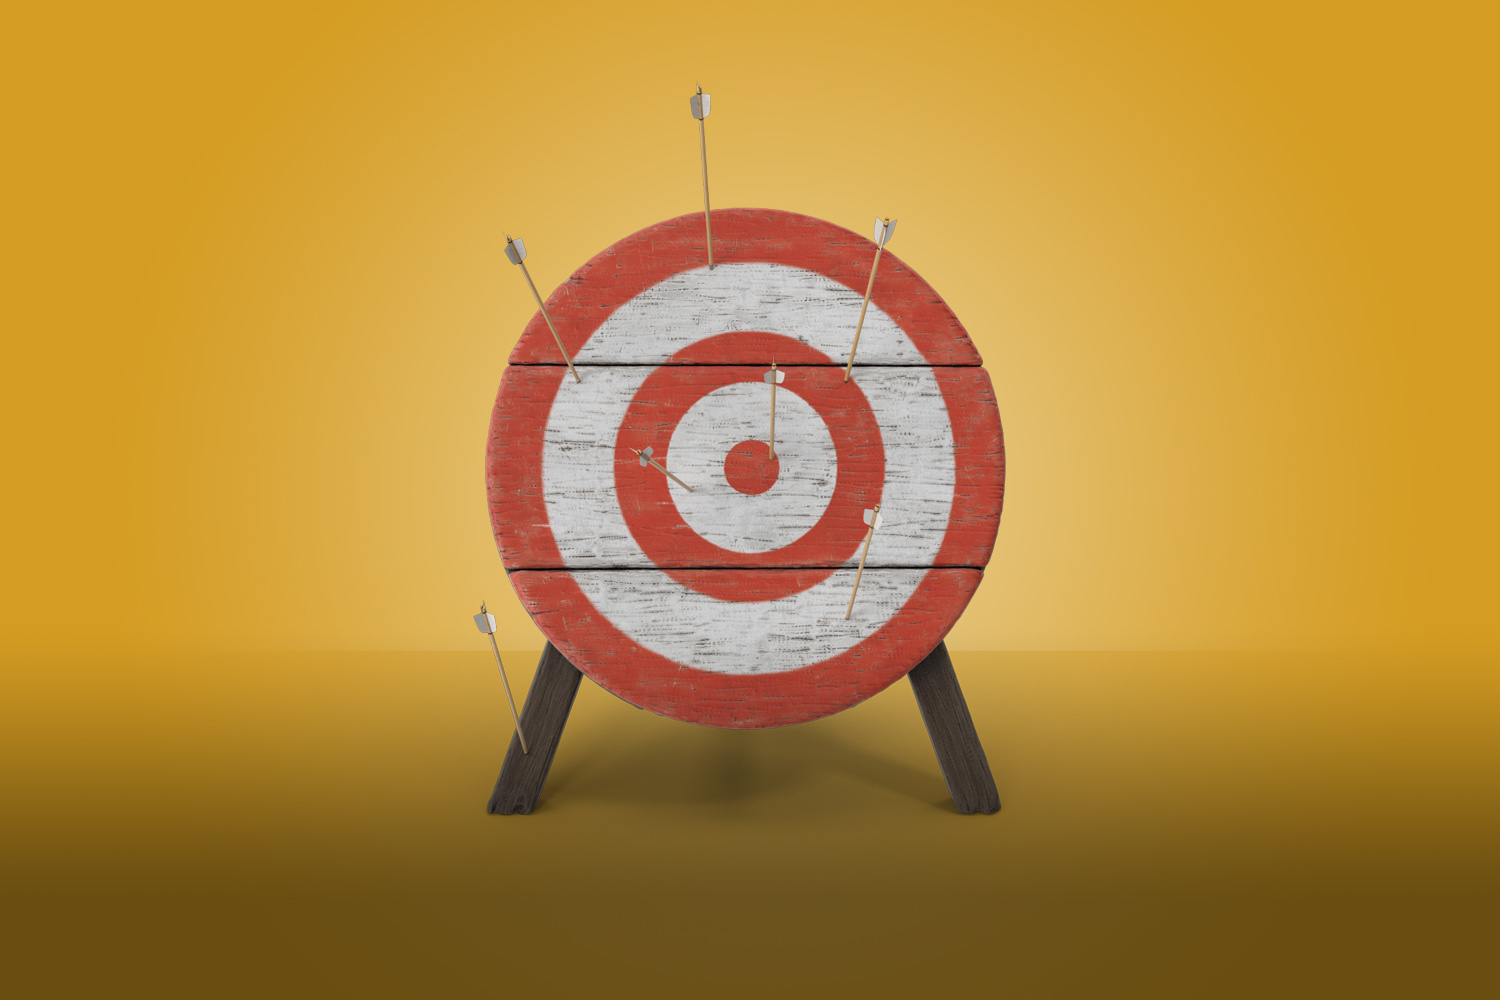 target with arrows